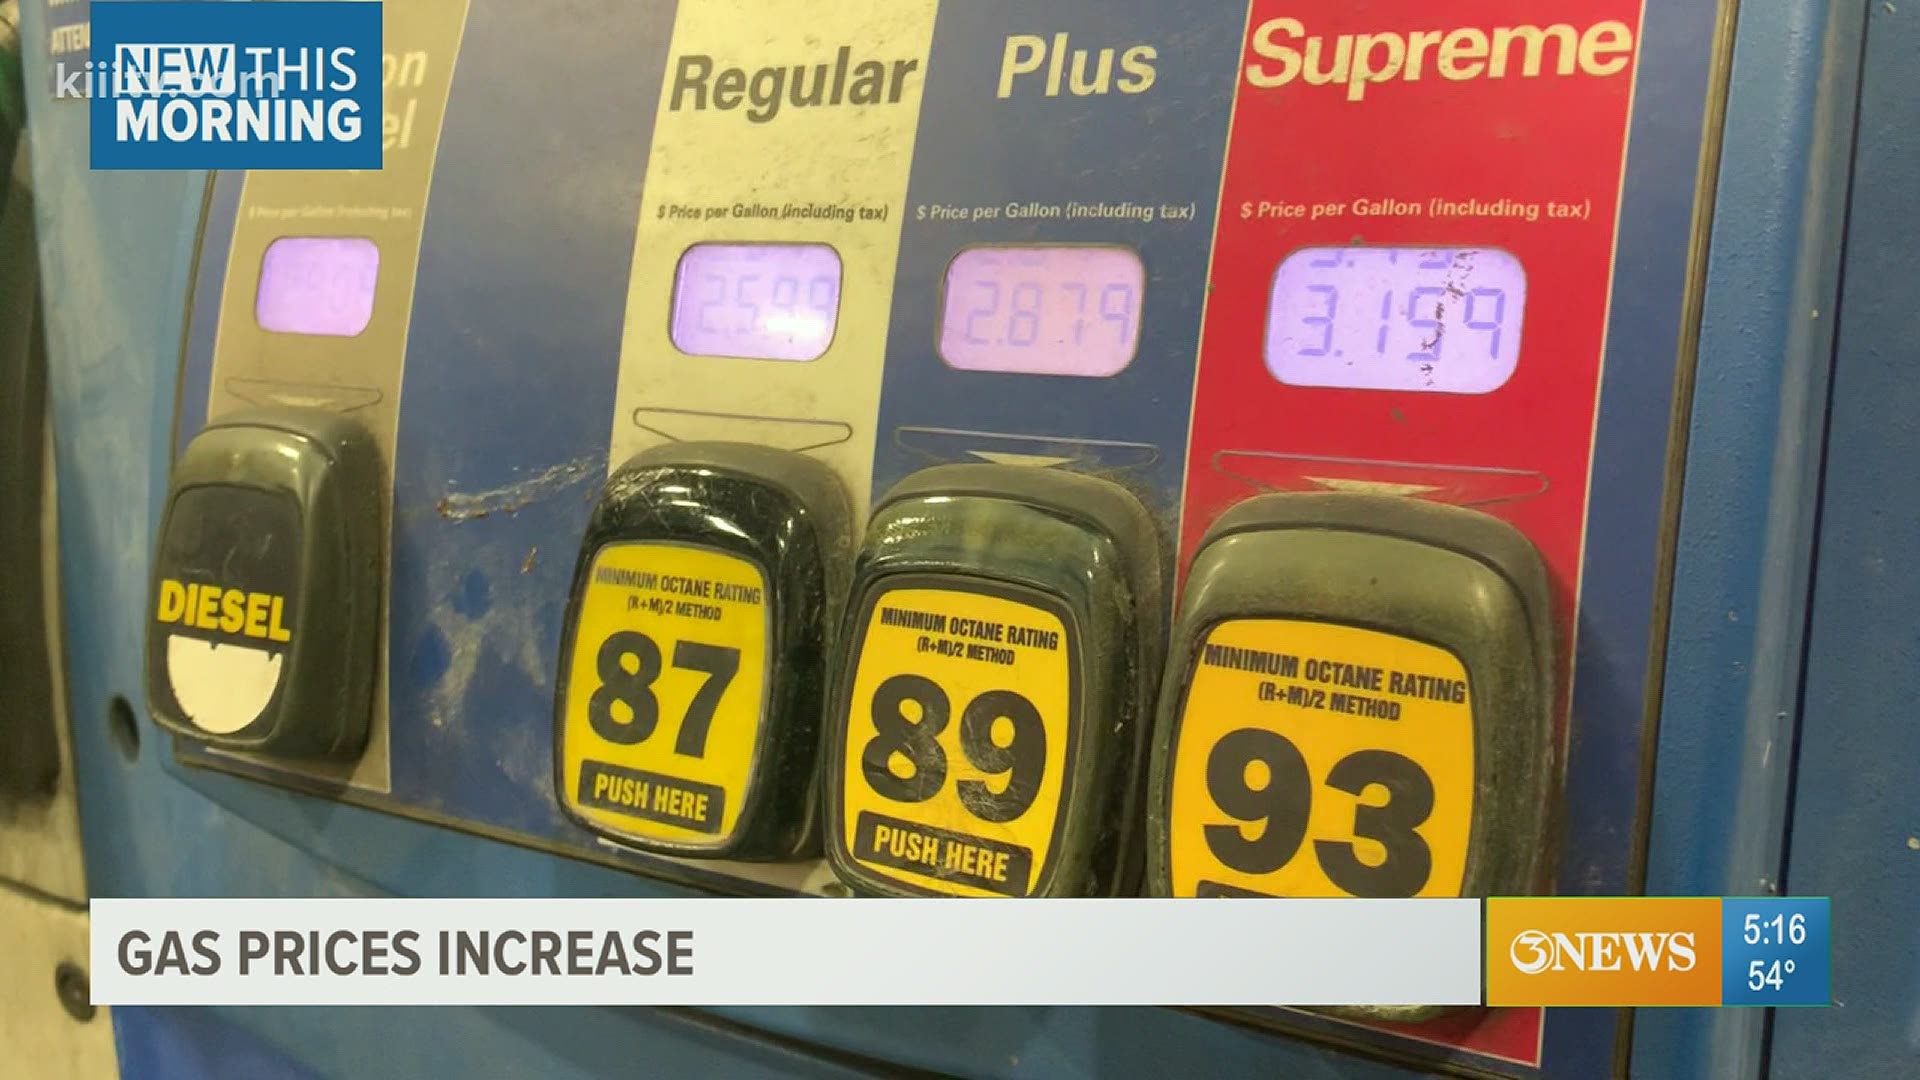 Although Texans are seeing an increase in the price at the pump, experts say they're not seeing the worst of it in other states.